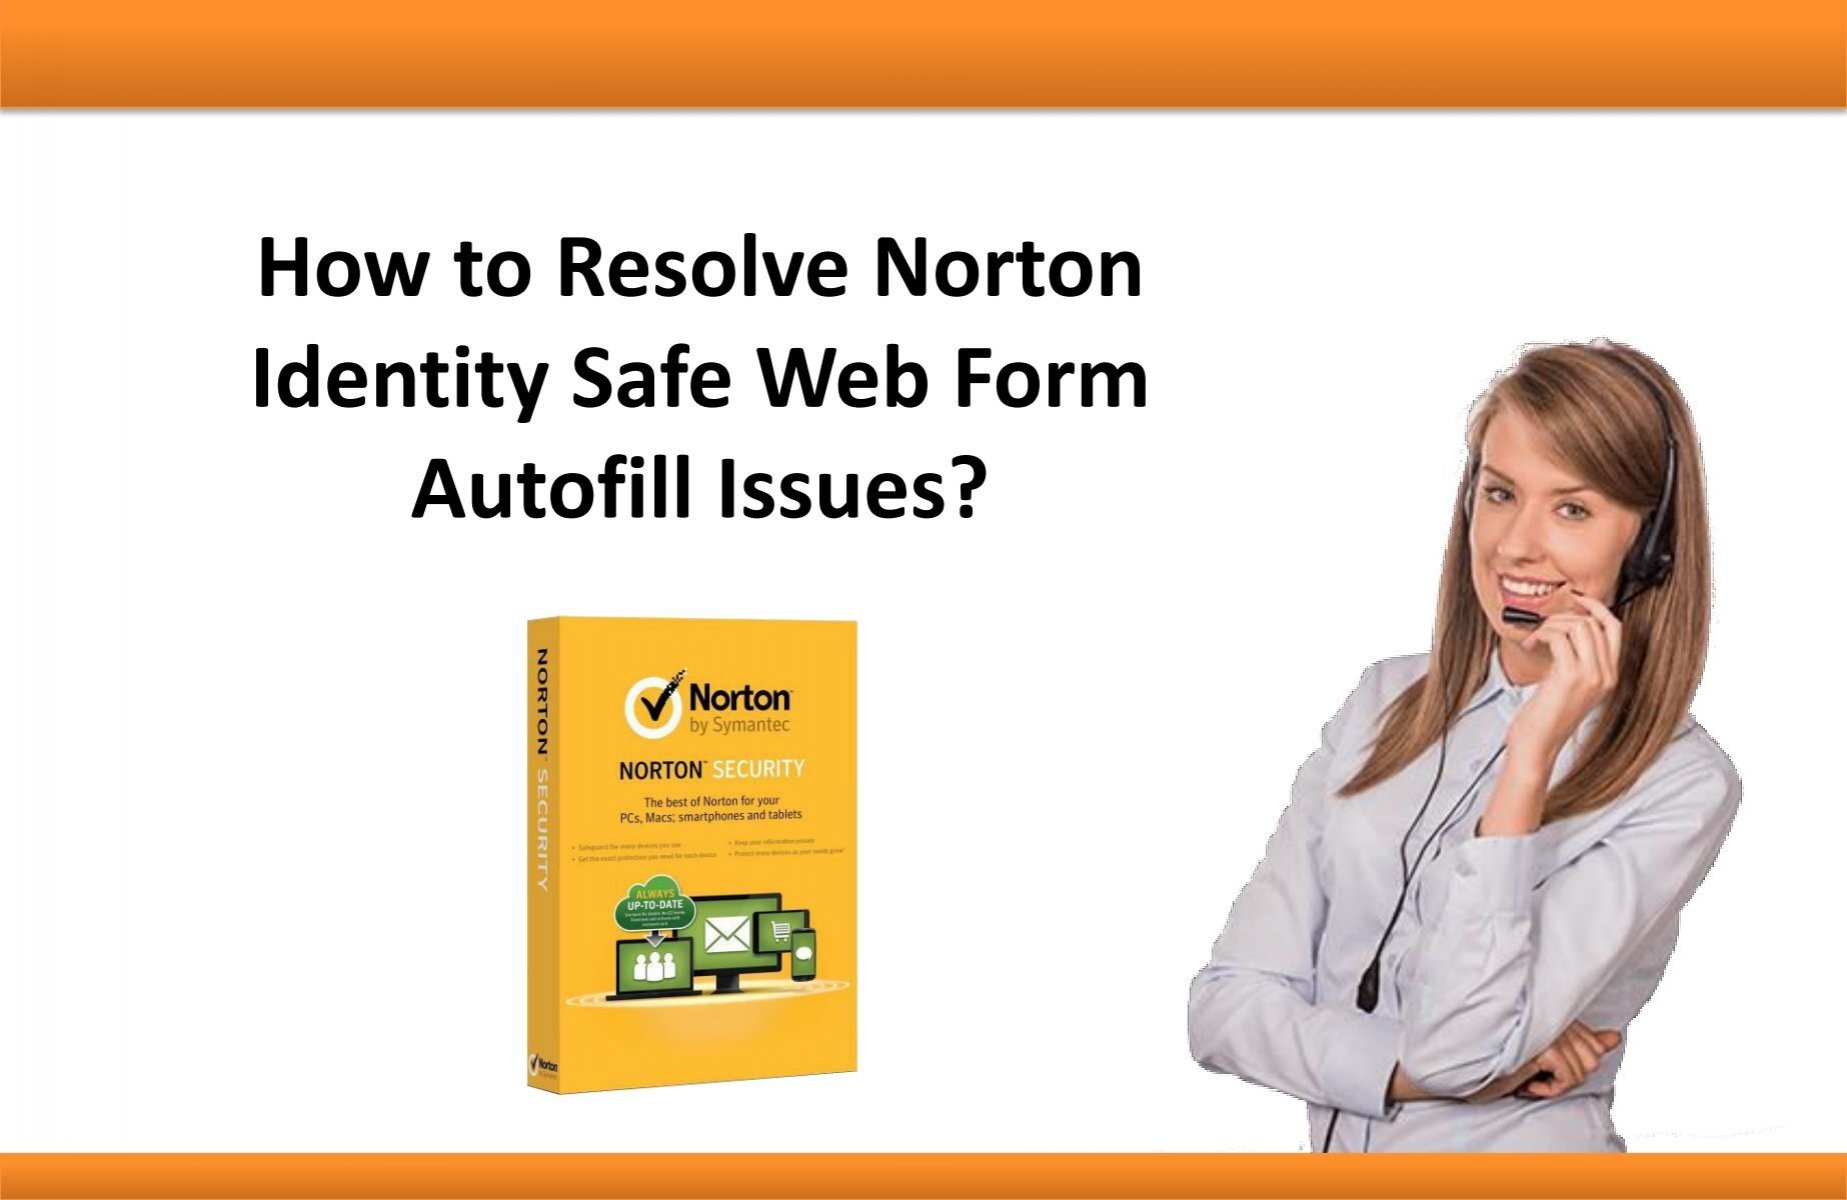 How To Resolve Norton Identity Safe Web Form Autofill Issues